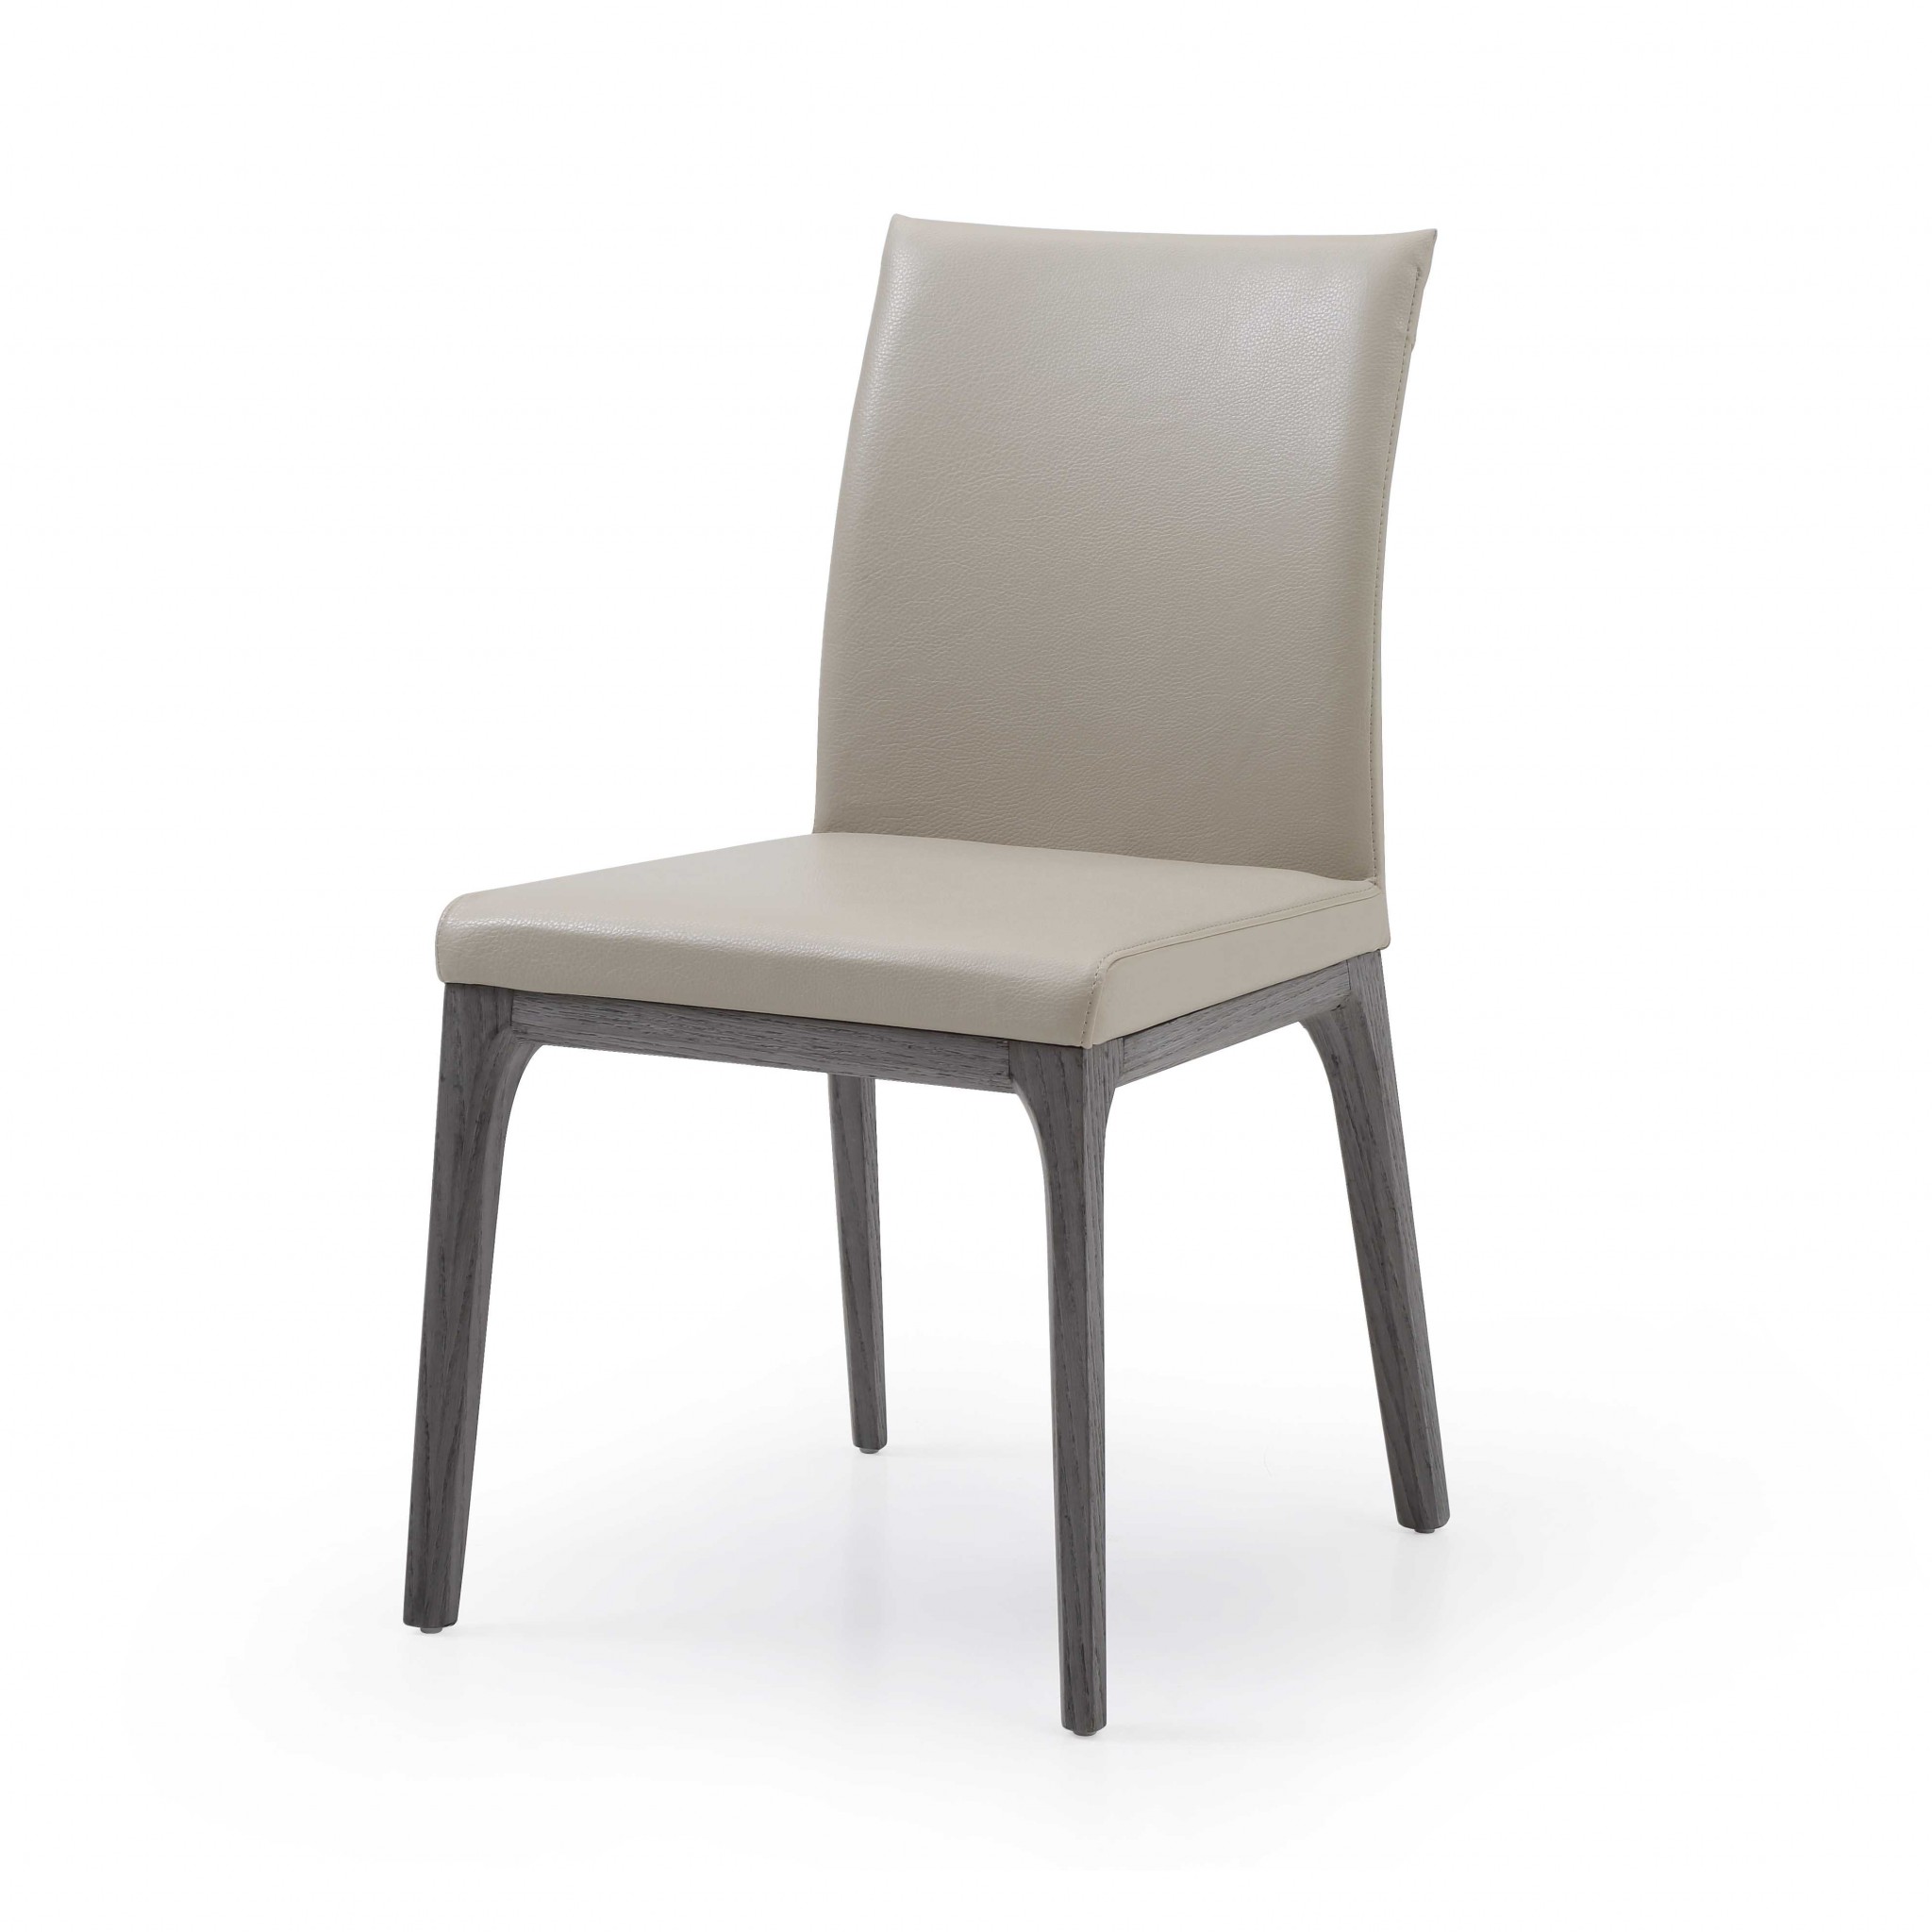 20" X 23" X 35" Taupe Faux Leather or Metal Dining Chair